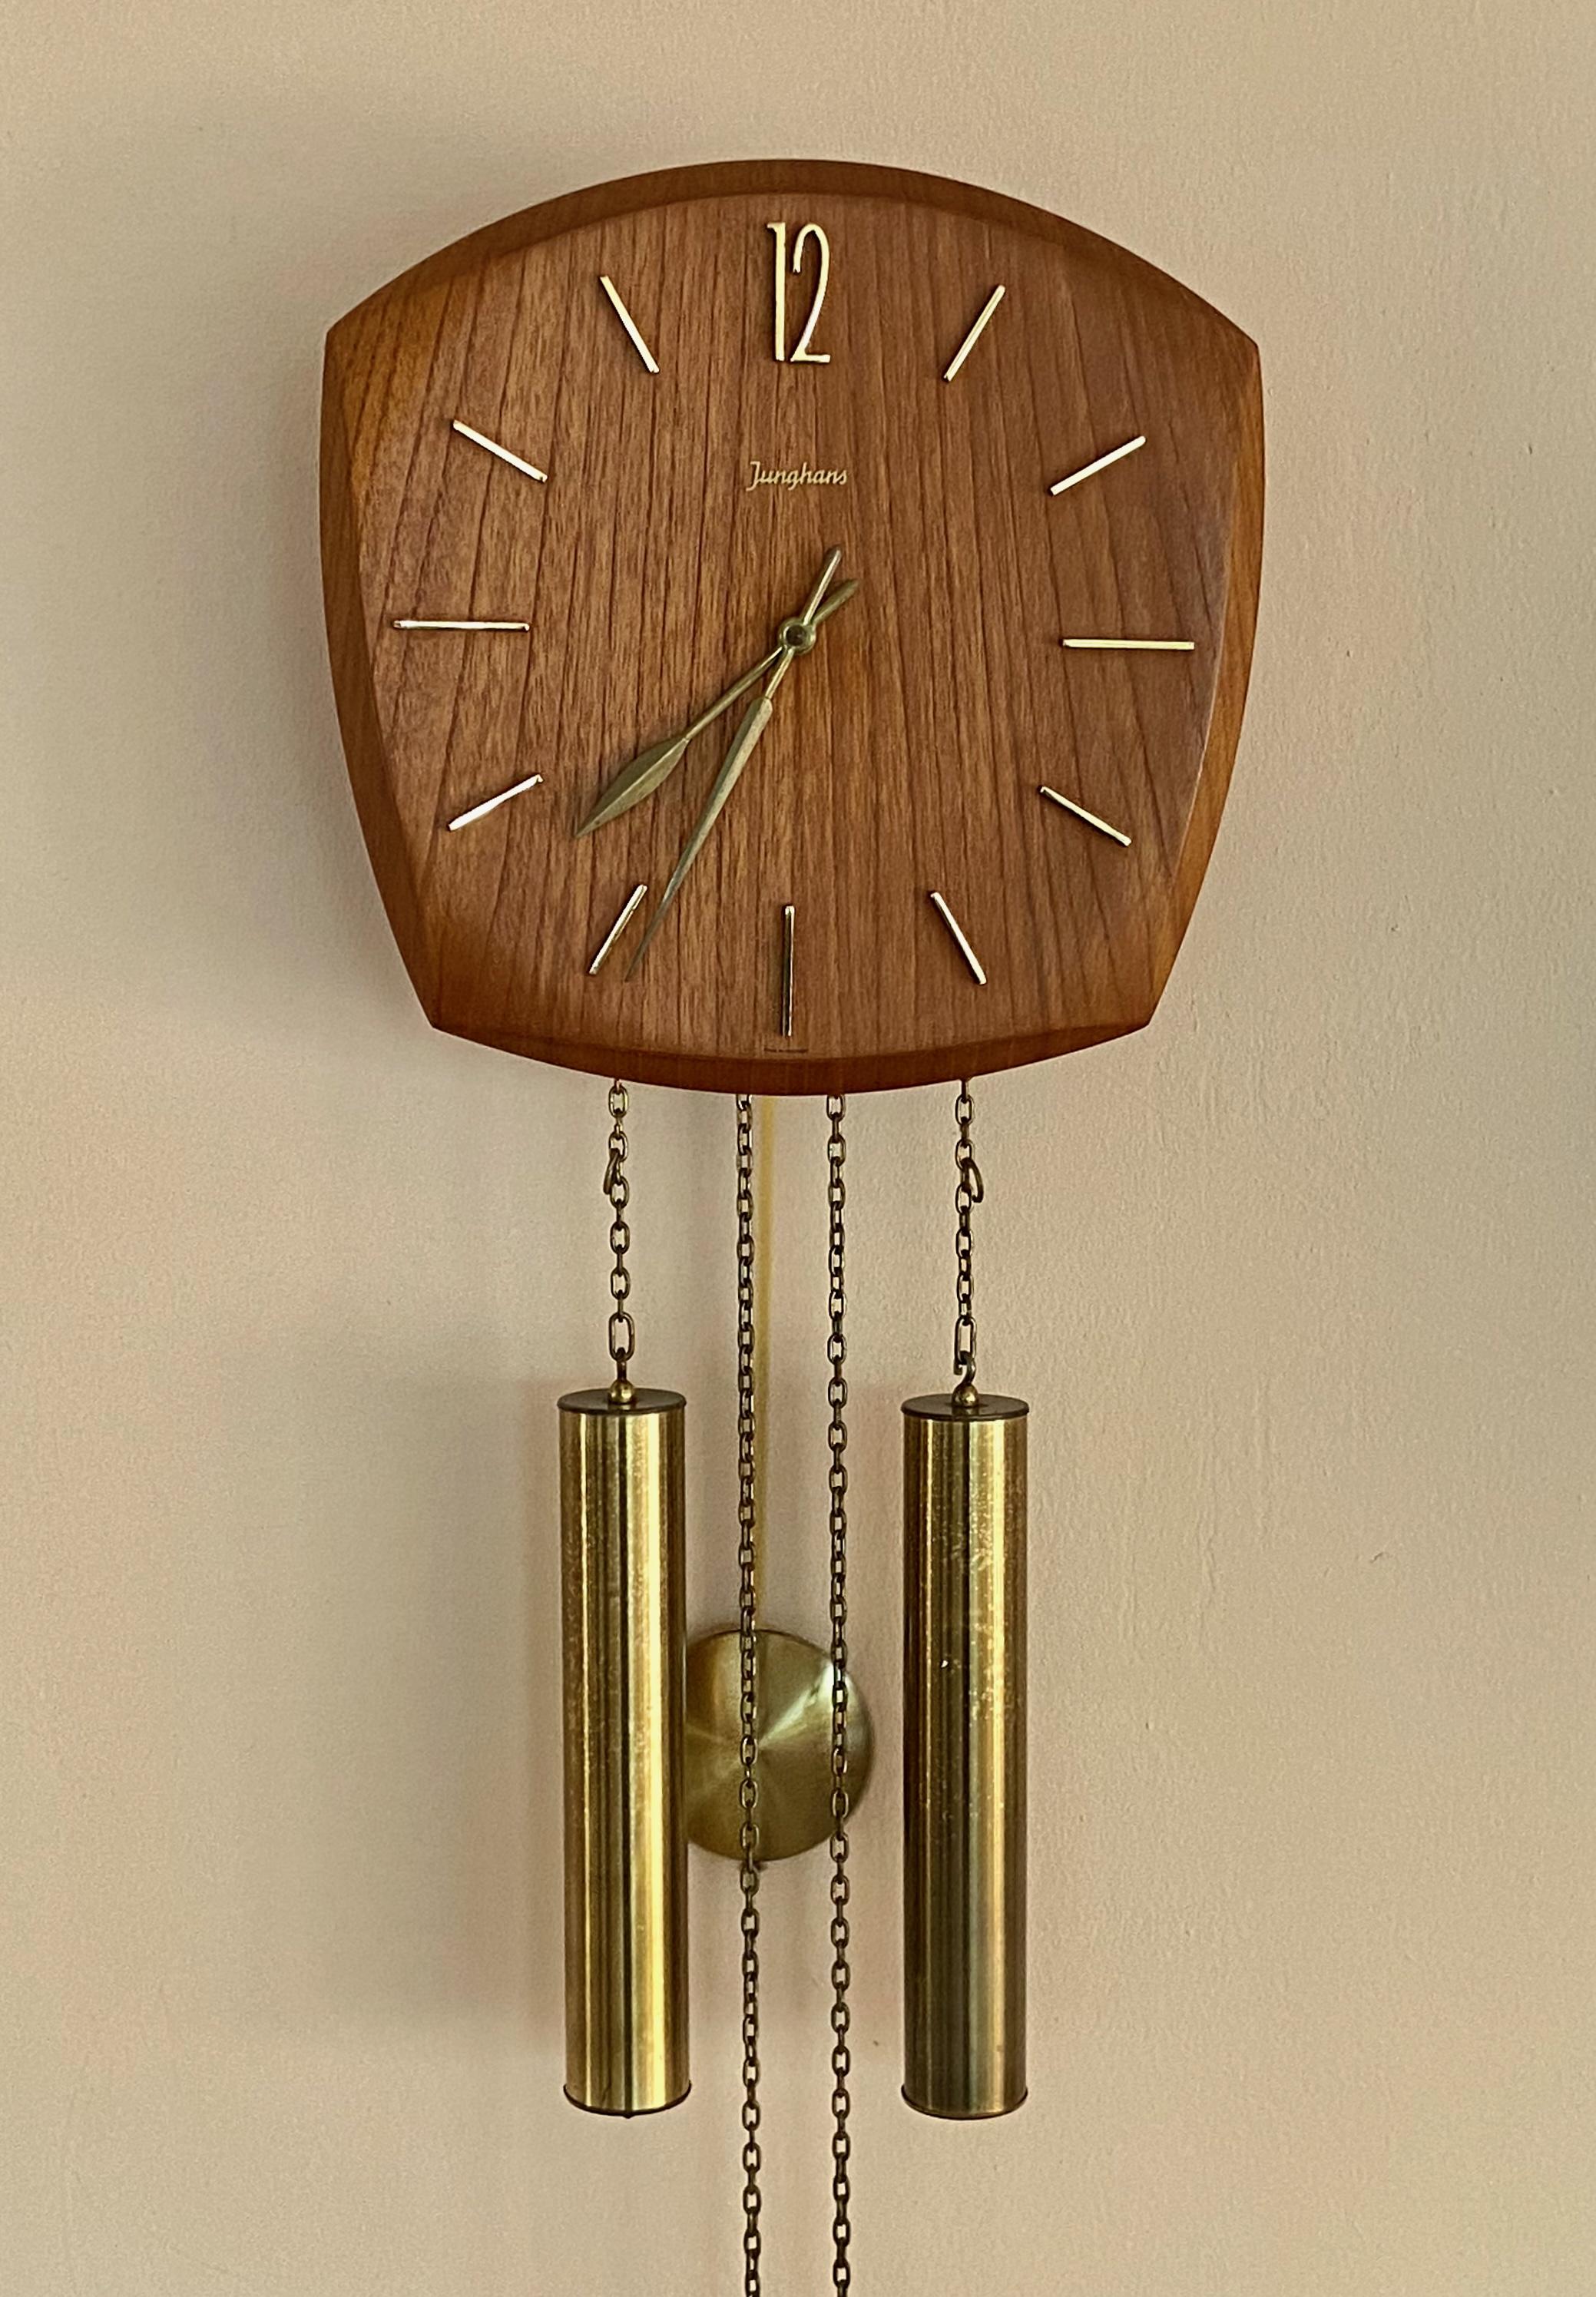 German 1960s Junghans Pendulum + Weights + Gong Wall Clock For Sale 2